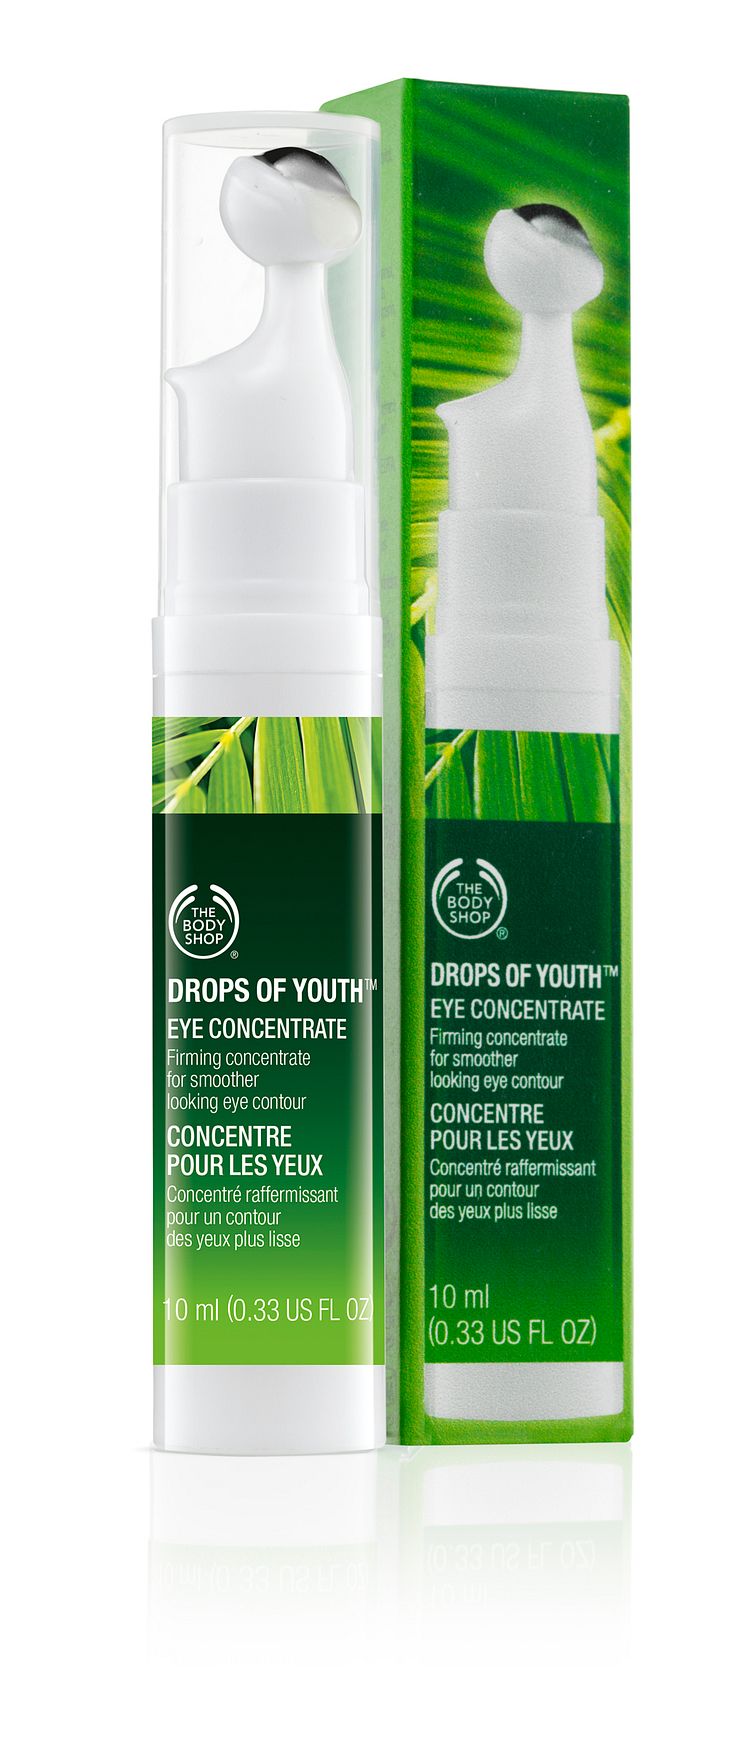 Drops of Youth Eye Concentrate (with box)